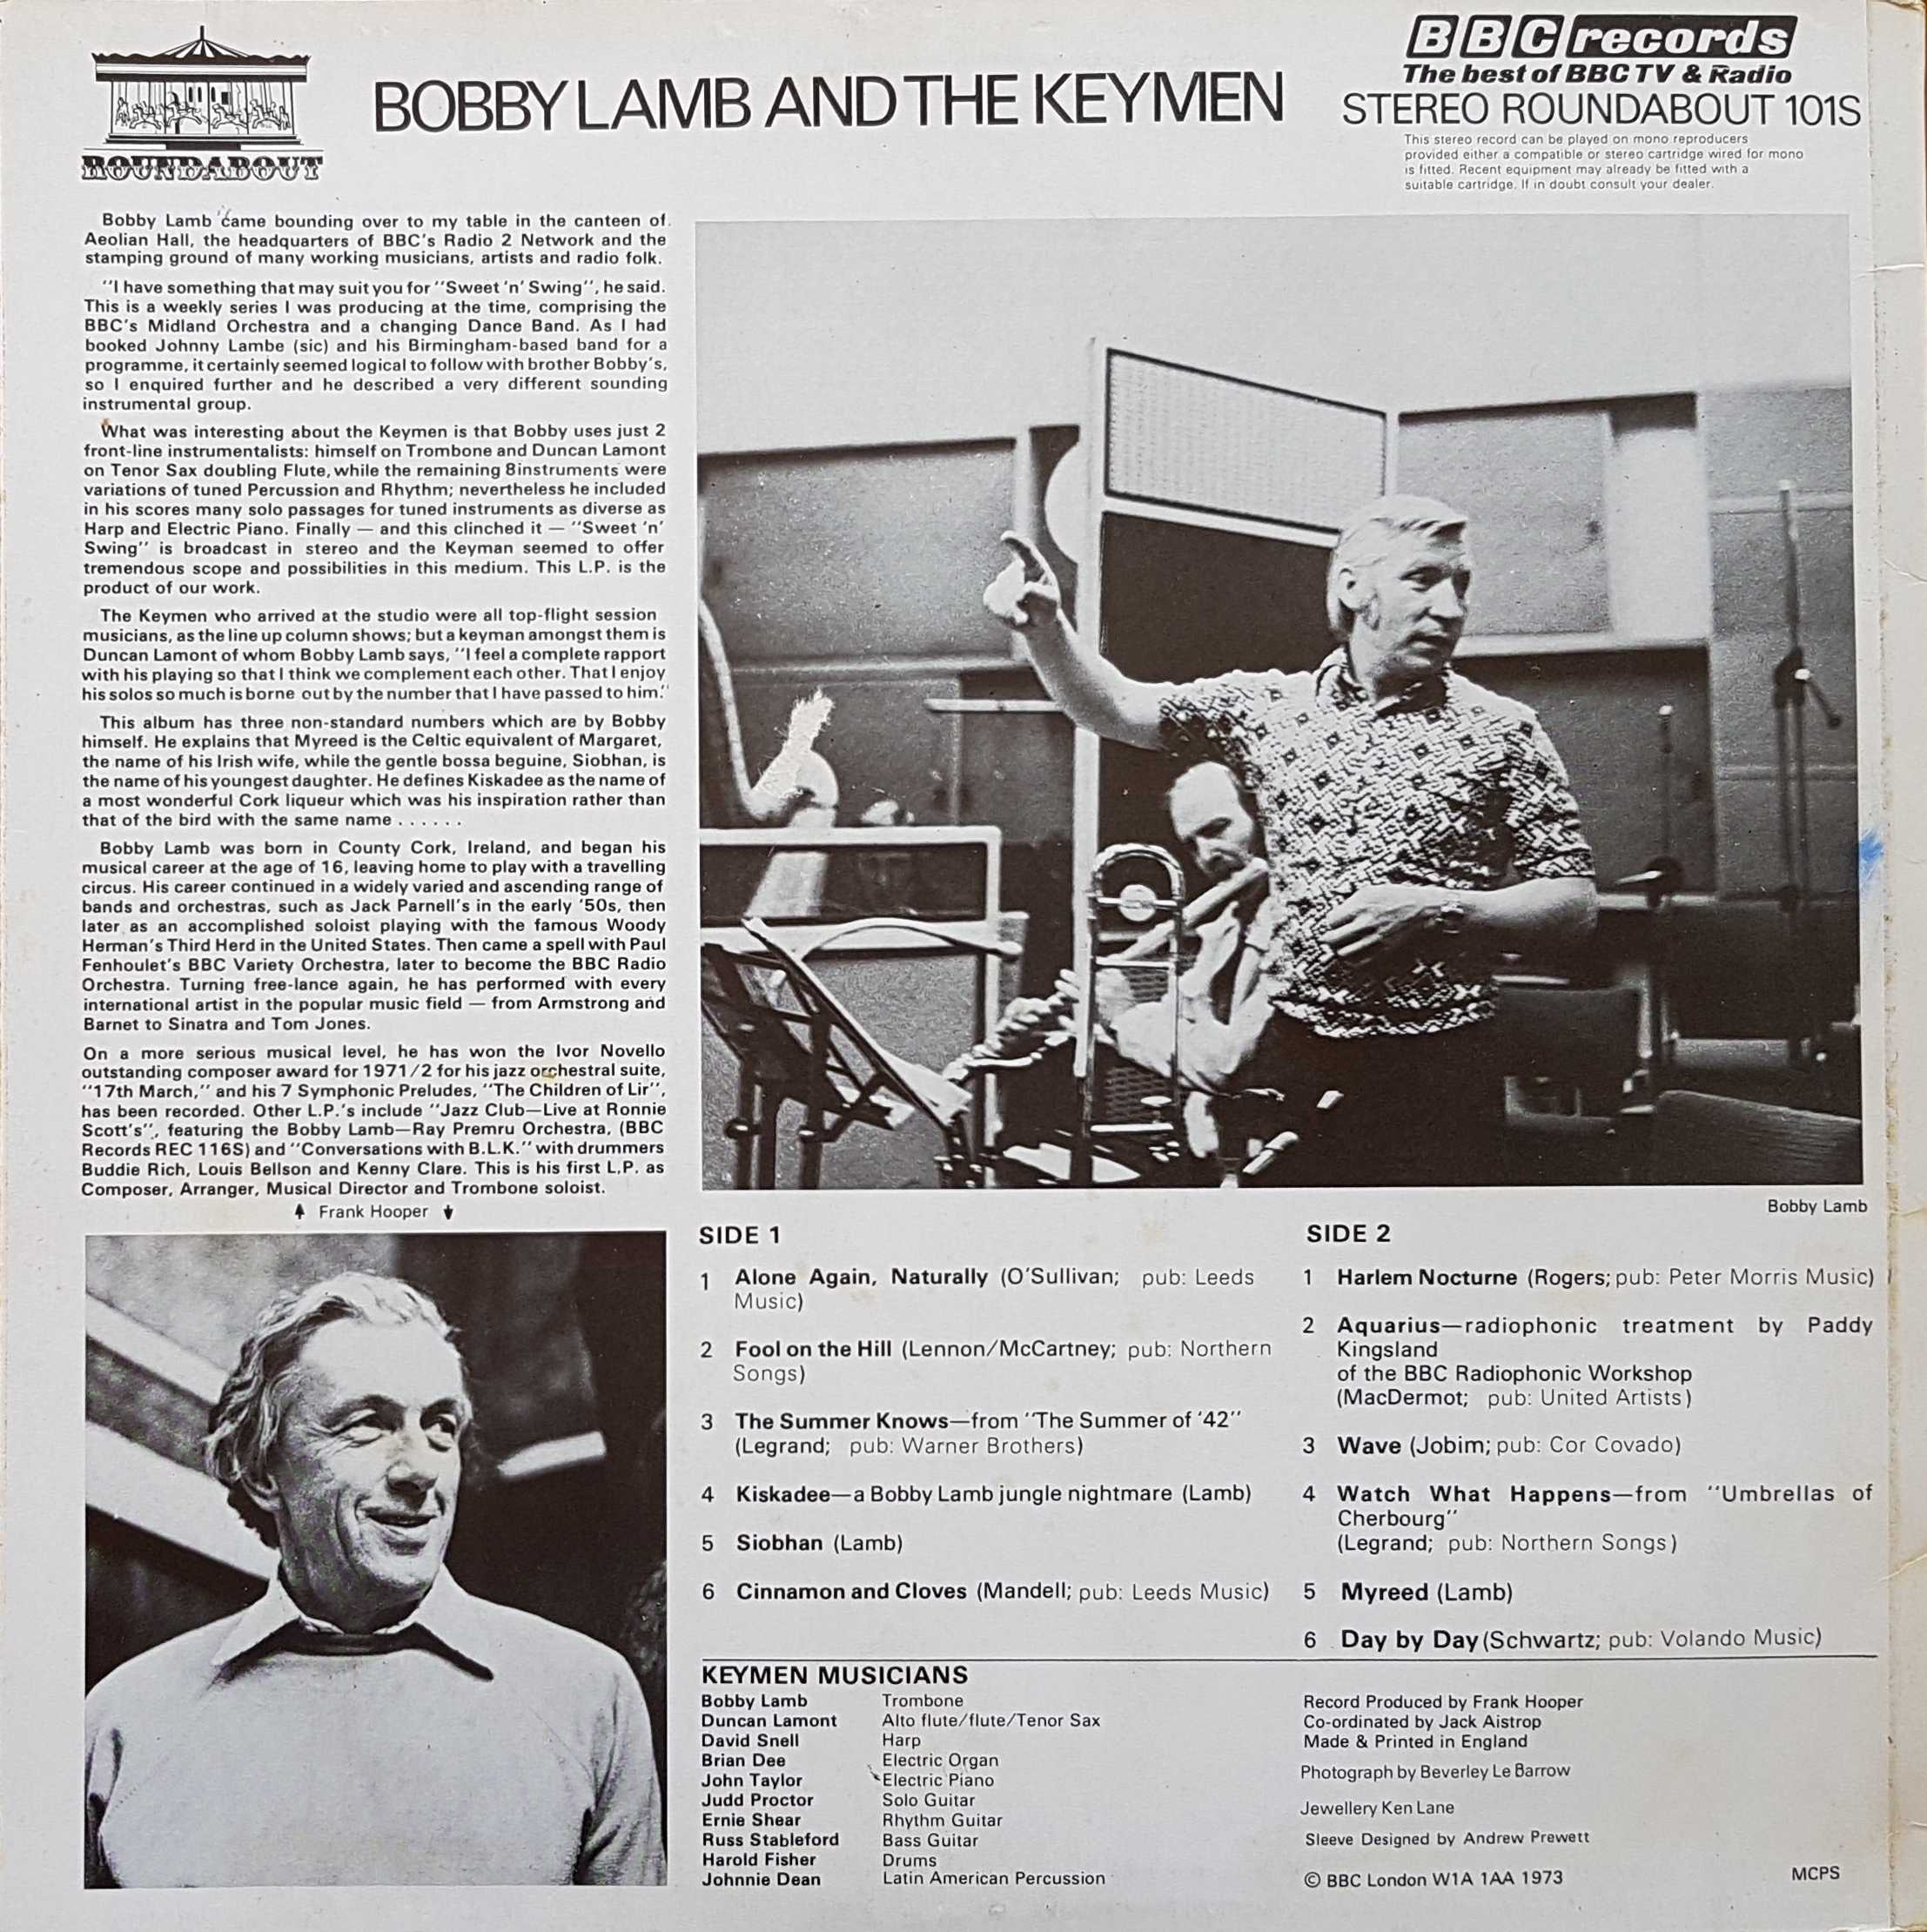 Picture of RBT 101 Bobby, Lamb & Keymen by artist Various from the BBC records and Tapes library